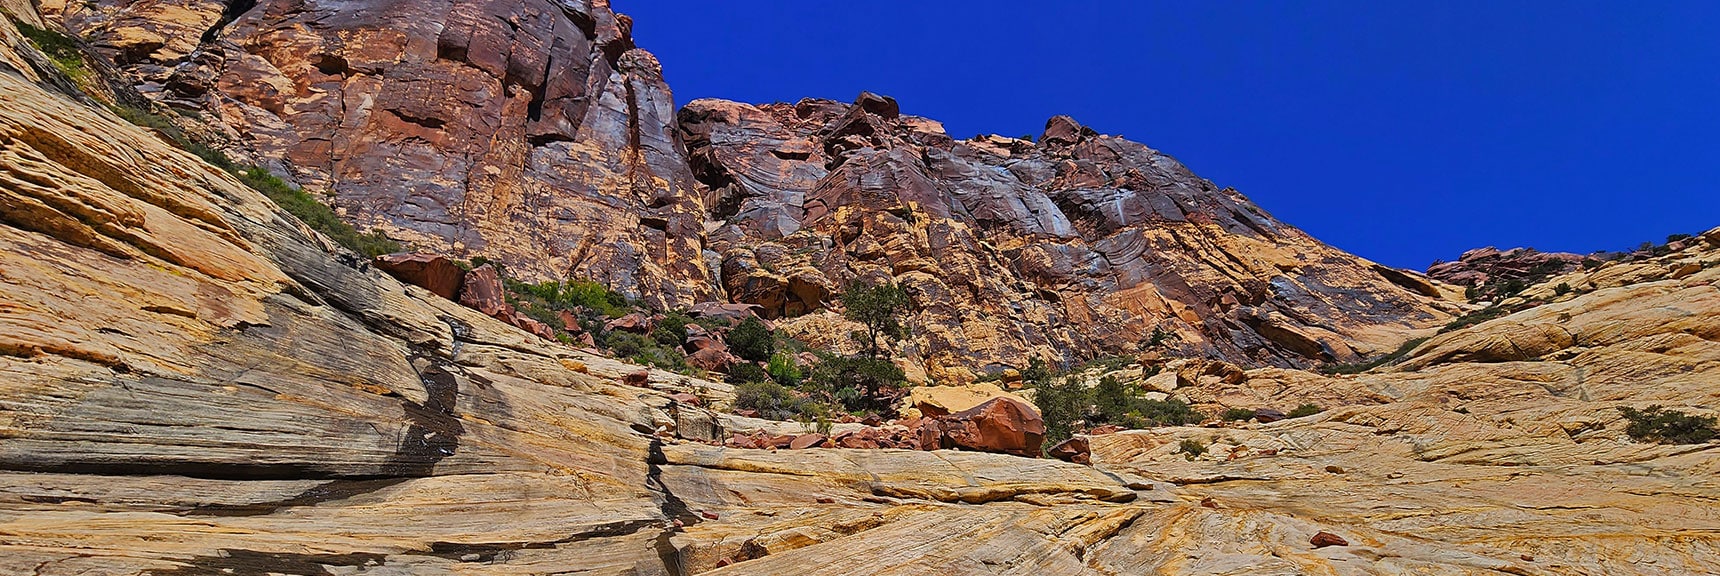 Ascent a Bit Steeper to Pass to Left of Boulder, But Little Exposure | Juniper Canyon | Red Rock Canyon National Conservation Area, Nevada | David Smith | LasVegasAreaTrails.com